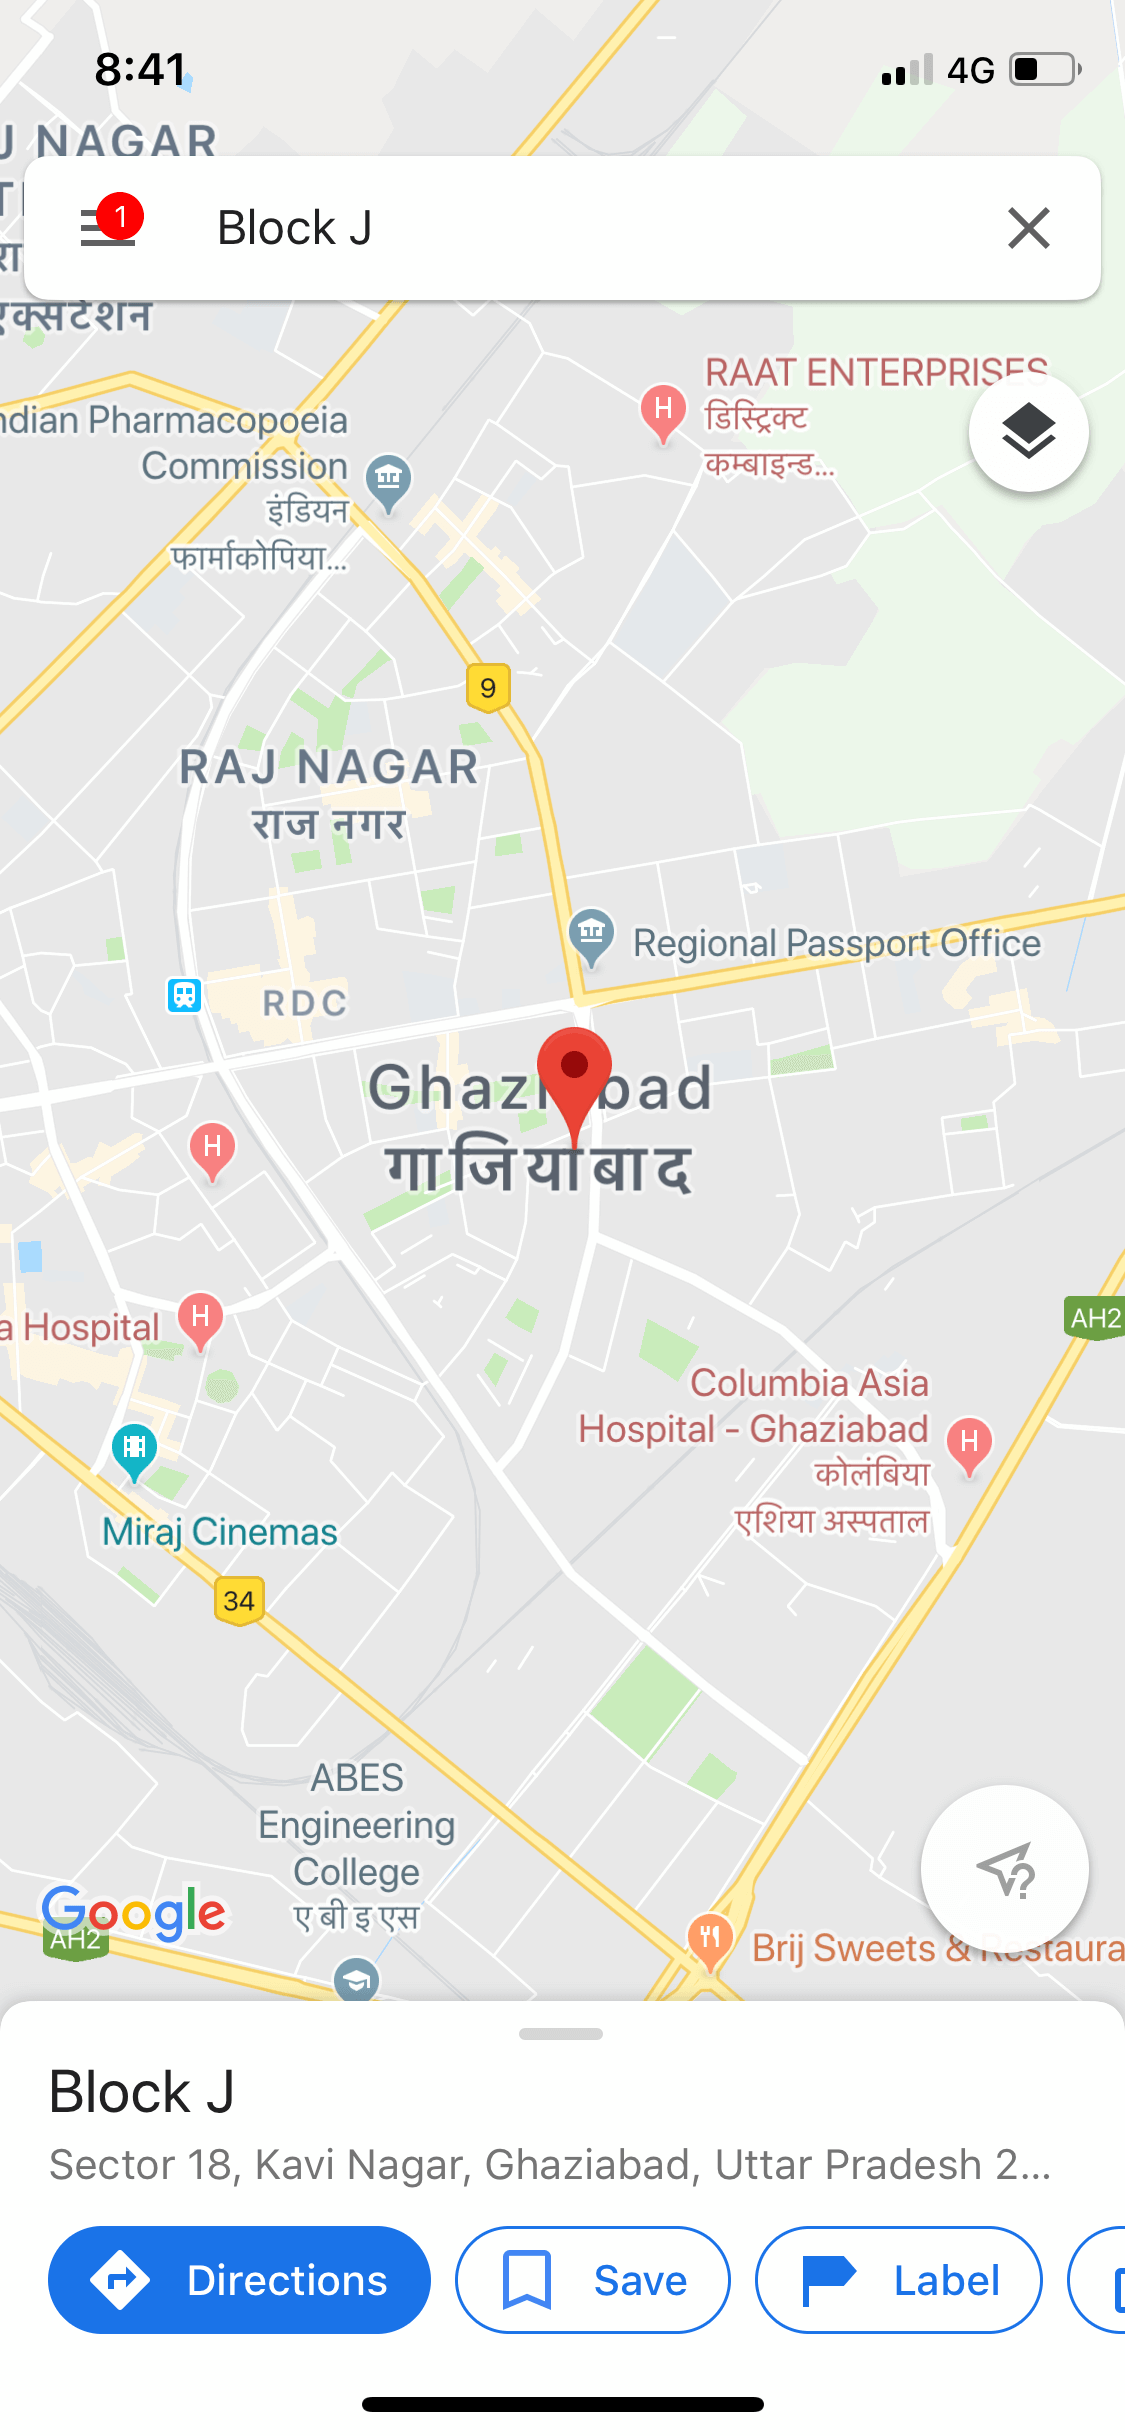 Long press on the Google maps in iPhone to get the name of any location